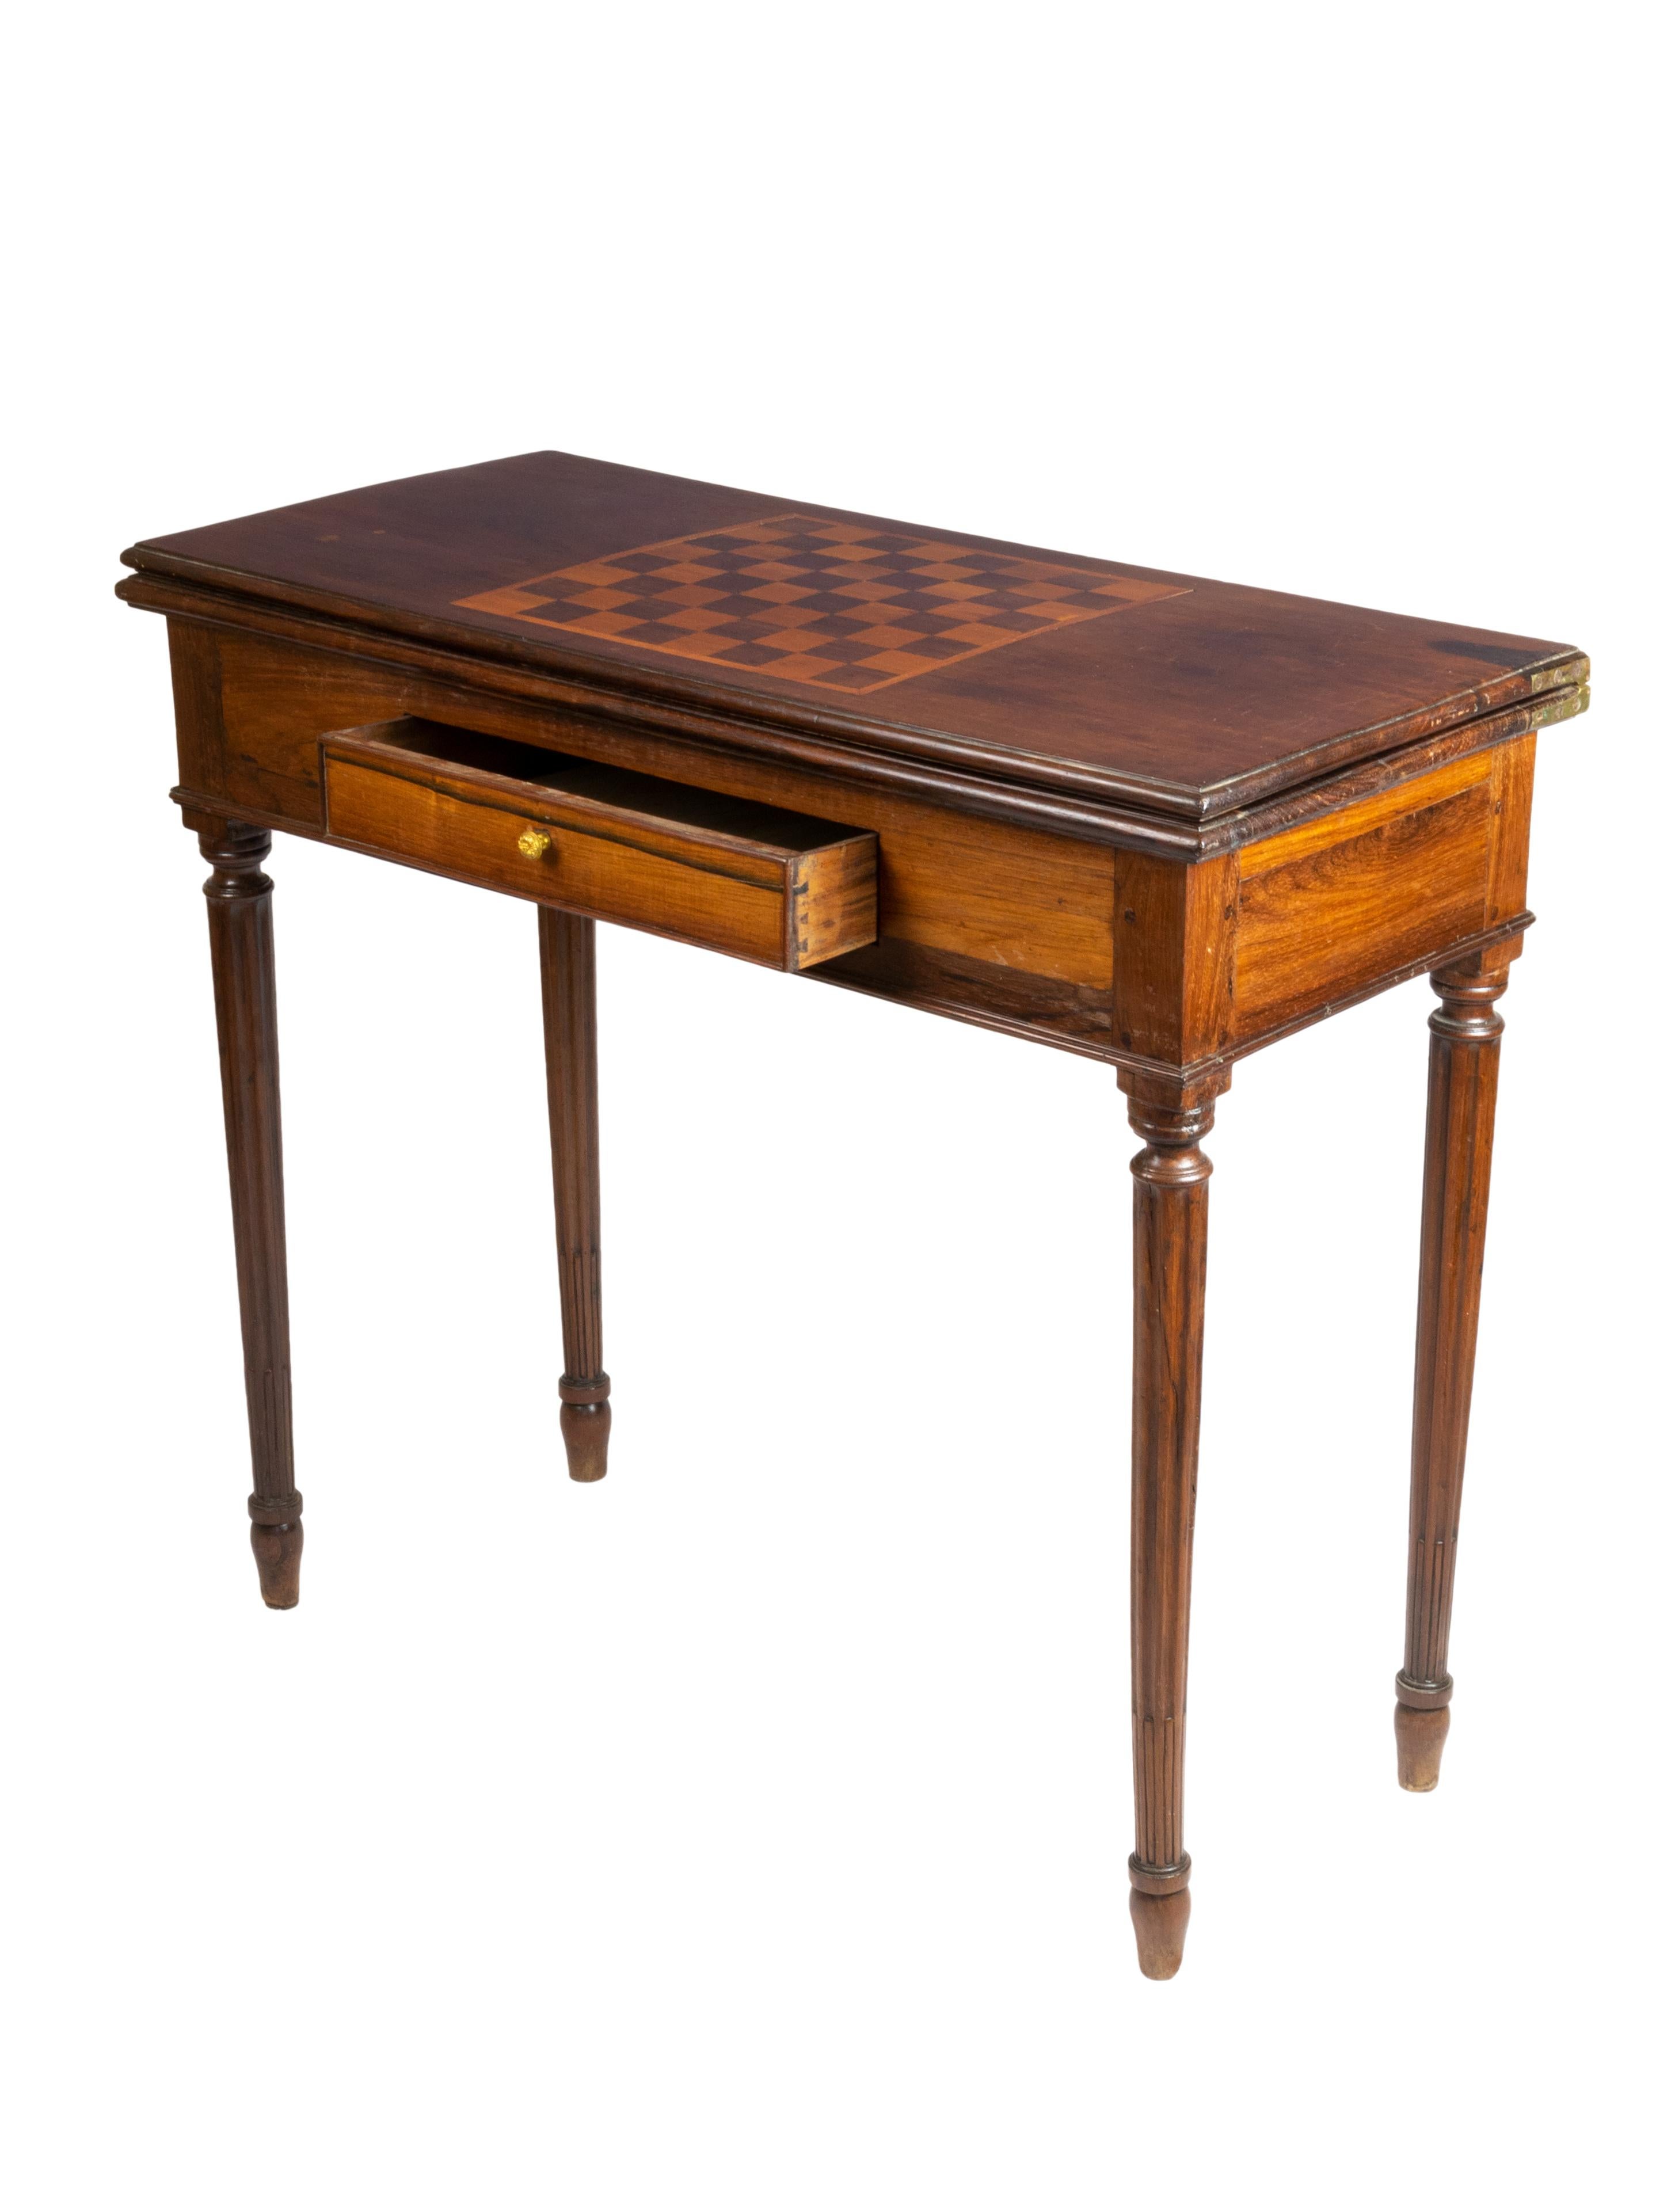 A very exquisite George III period card table in excellent original condition. A leg opens out to hold the playing surface with a green felt., a chess marquetry board and a center drawer.

Height 80 cm
Open 91 x 83.5 cm
Closed: 91 x 41.5 cm